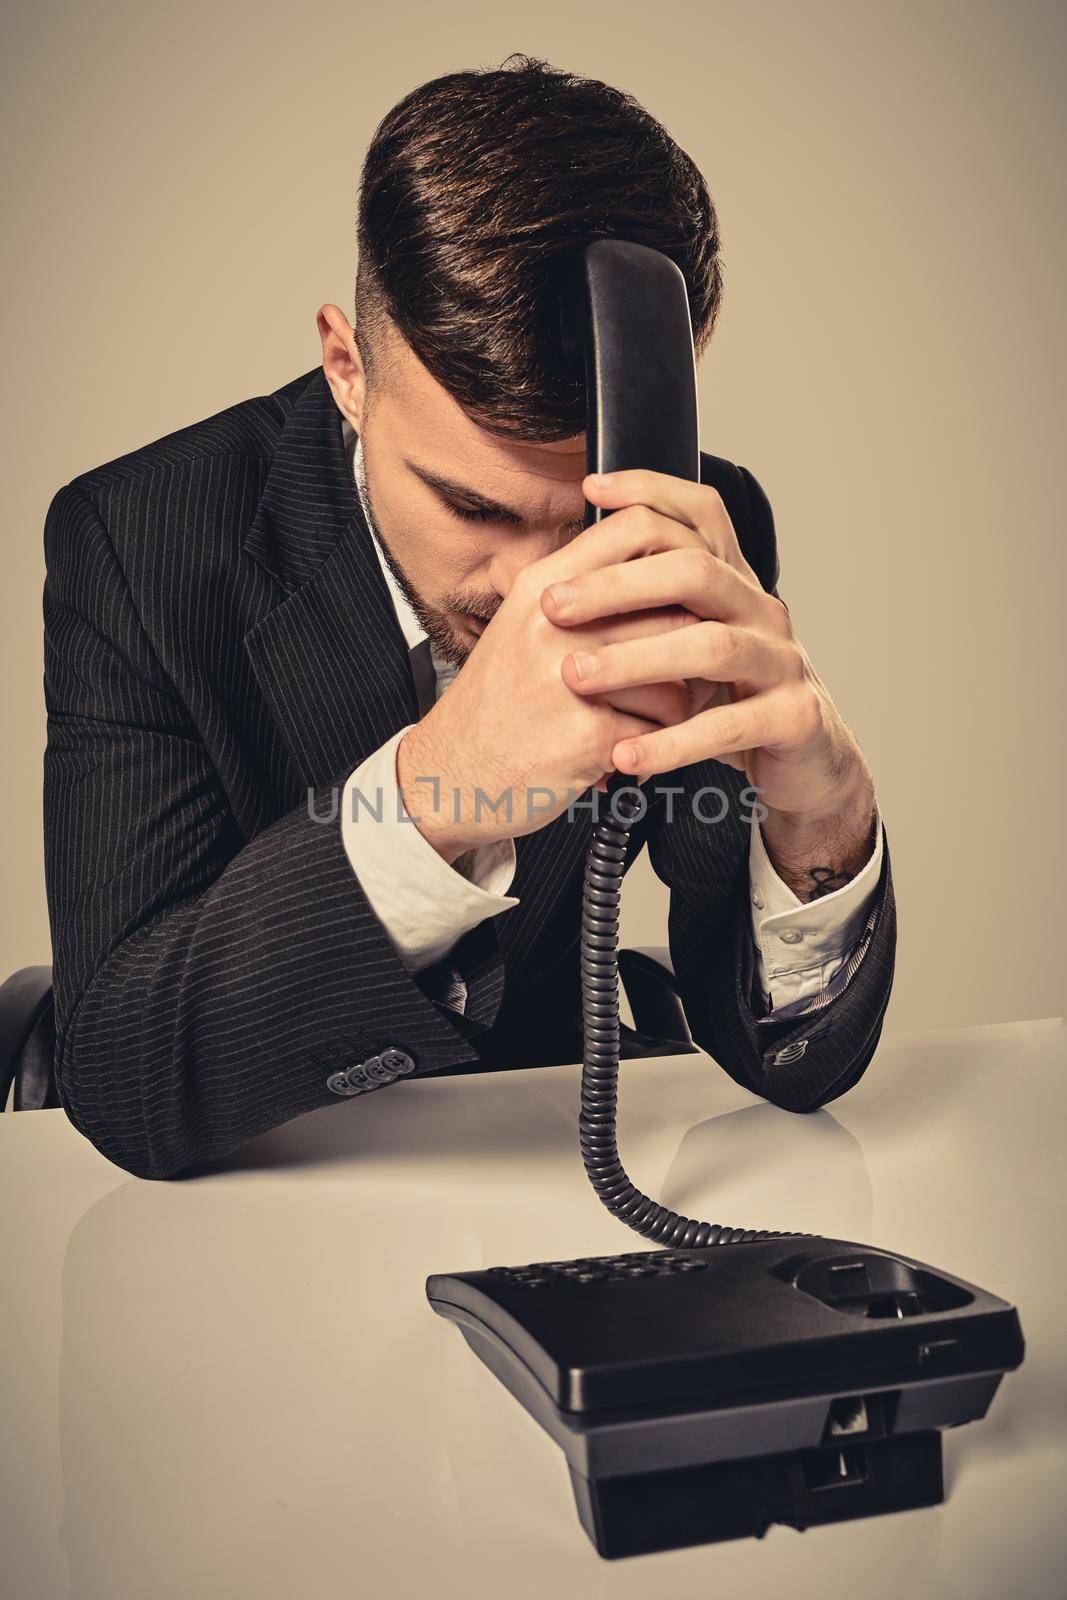 A young man in a black suit dials the phone number while sitting in the office. Manager beats himself over the head with a telephone